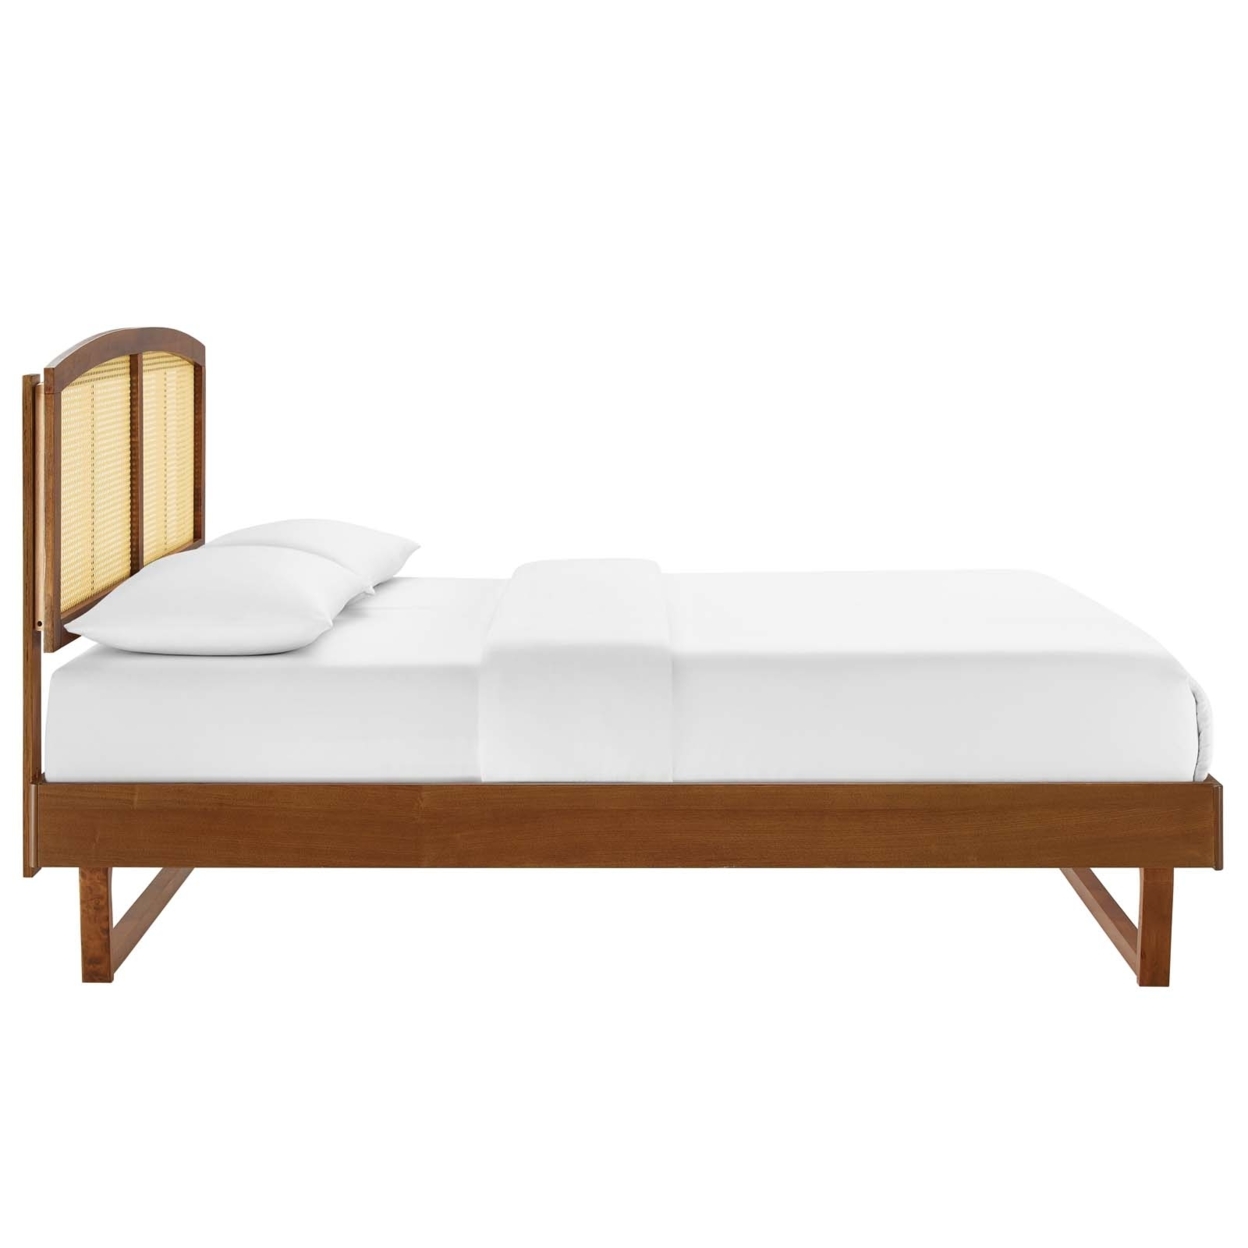 Sierra Cane And Wood King Platform Bed With Angular Legs, Walnut